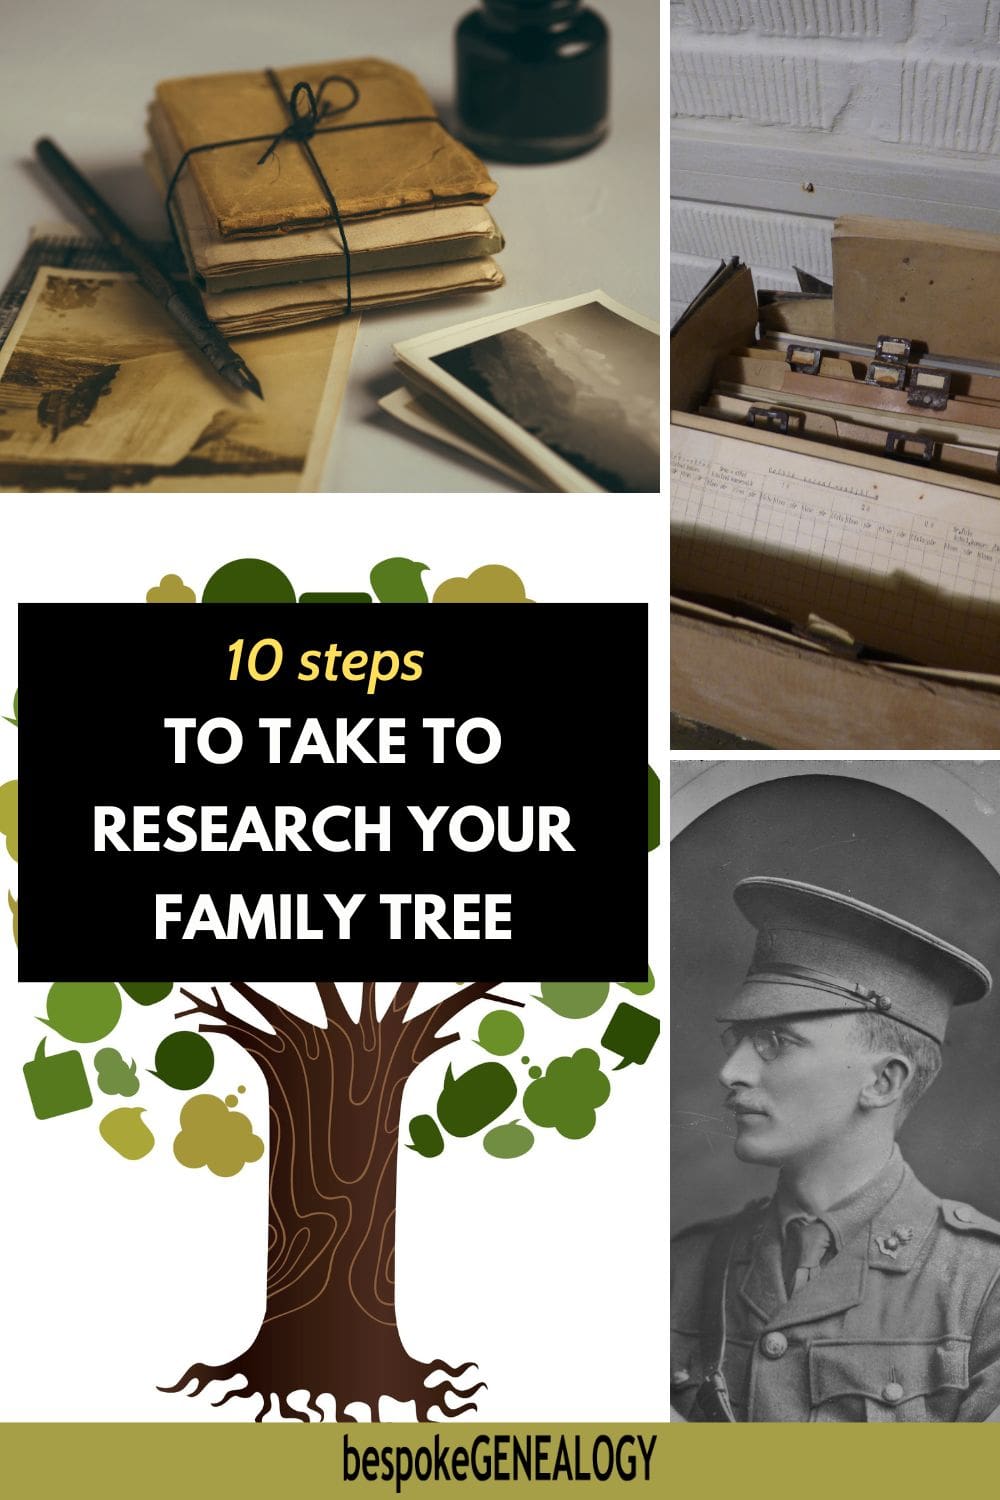 10 Steps to take to research your family tree. 4 pictures showing old documents, an image of a tree, a card index and an old photograph of a soldier